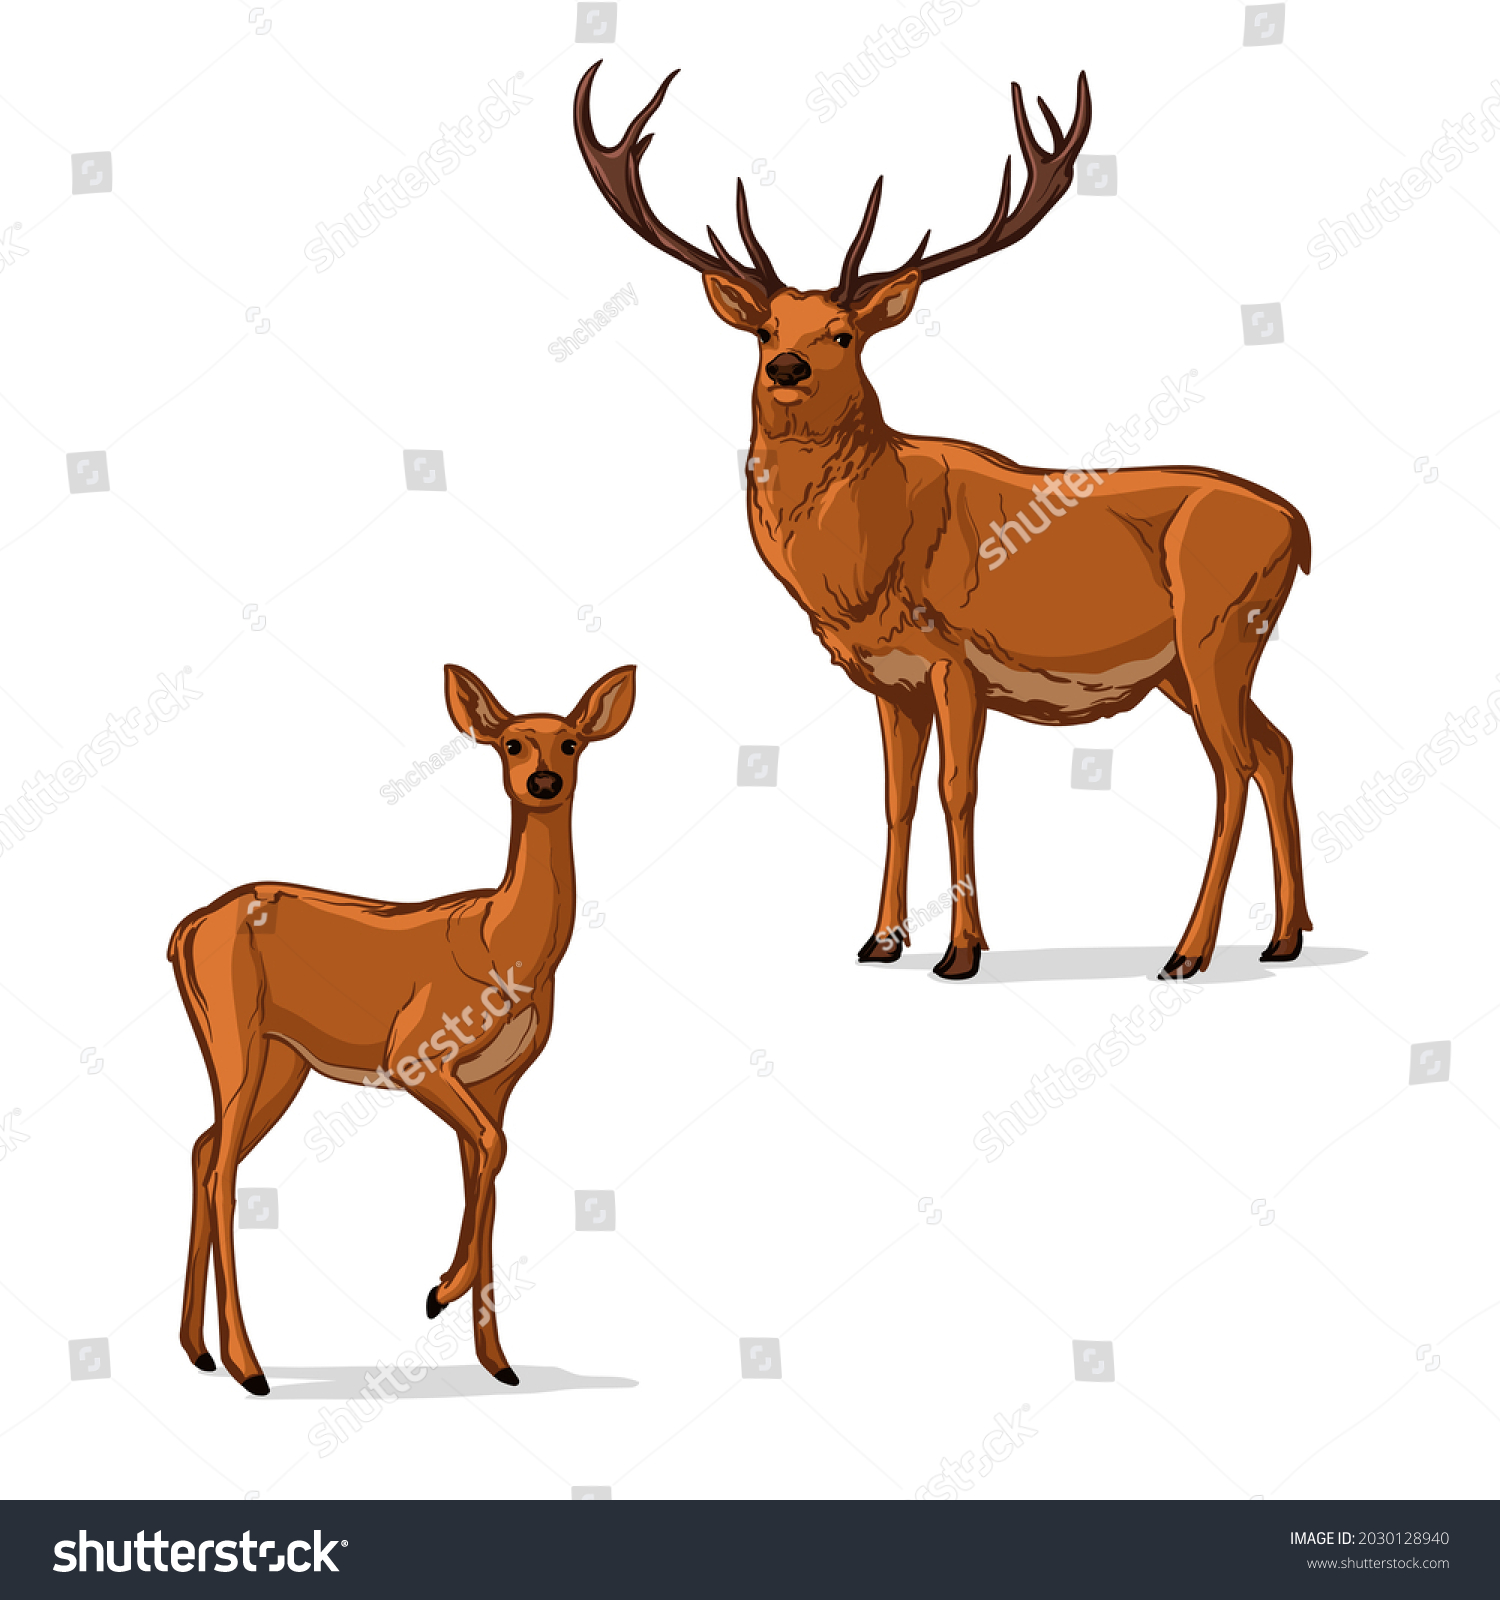 Vector illustration of a Deer. Two deer, isolated on a white background. #2030128940